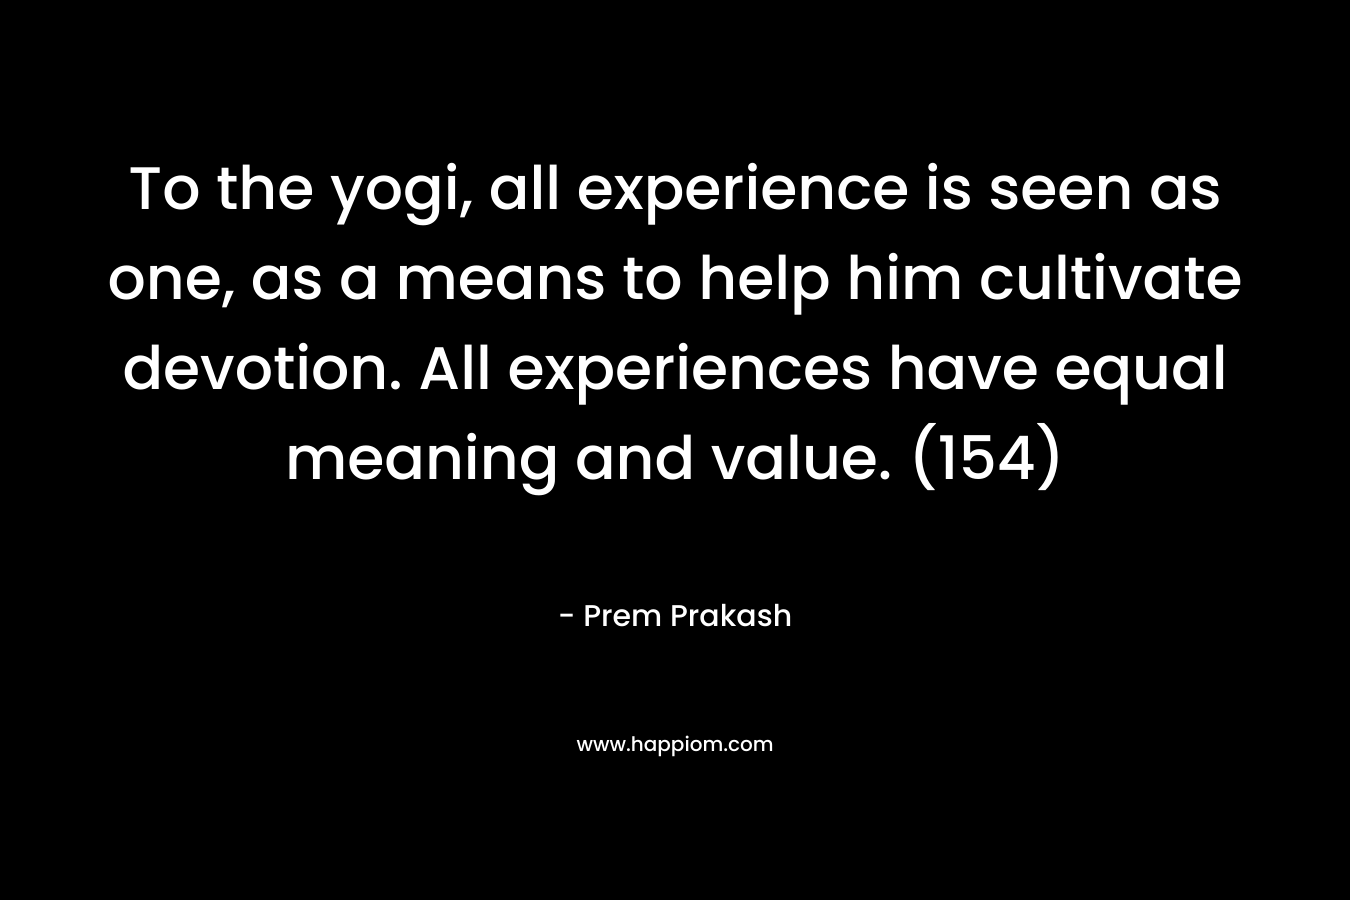 To the yogi, all experience is seen as one, as a means to help him cultivate devotion. All experiences have equal meaning and value. (154) – Prem Prakash